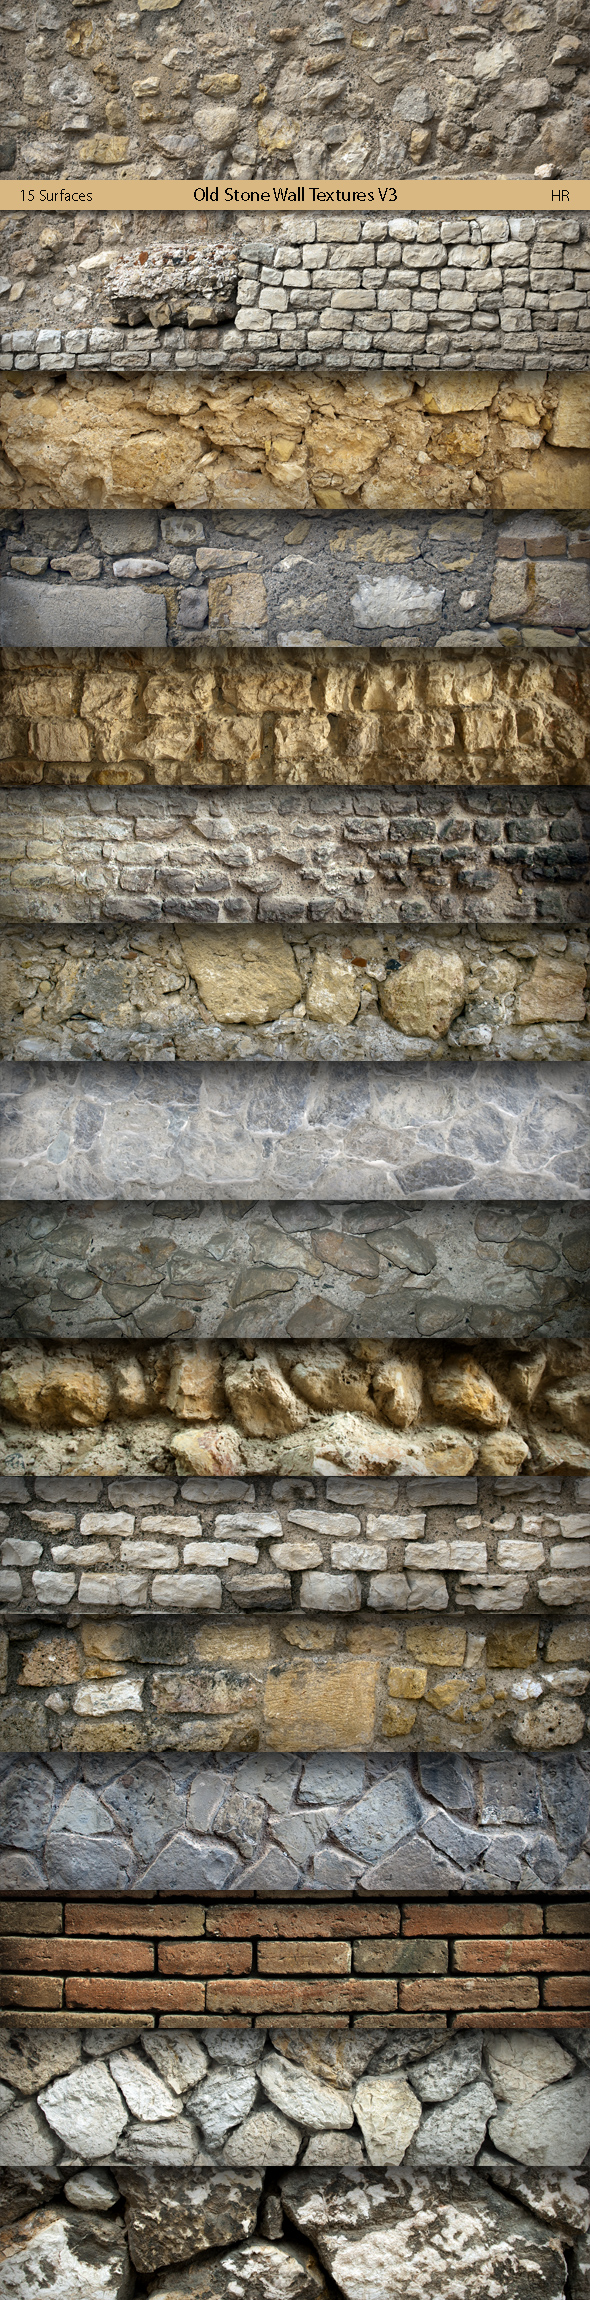 Old Stone Wall Textures V3